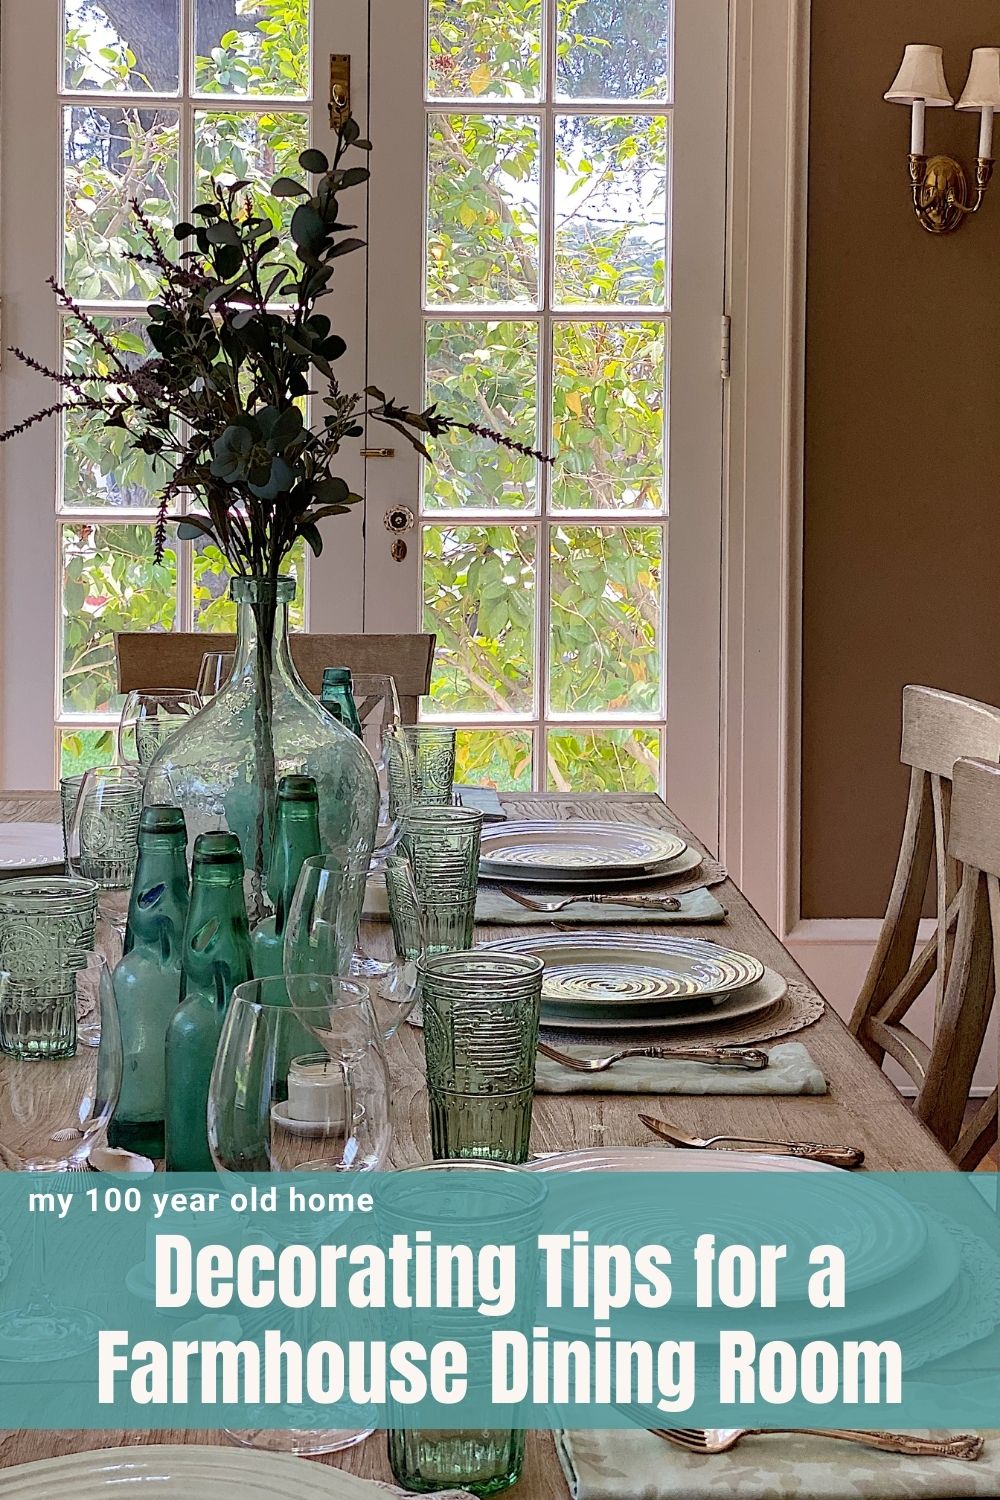 My summer home tour continues and today I am sharing Decorating Tips for a Coastal Farmhouse Dining Room. The aqua green in here is stunning!